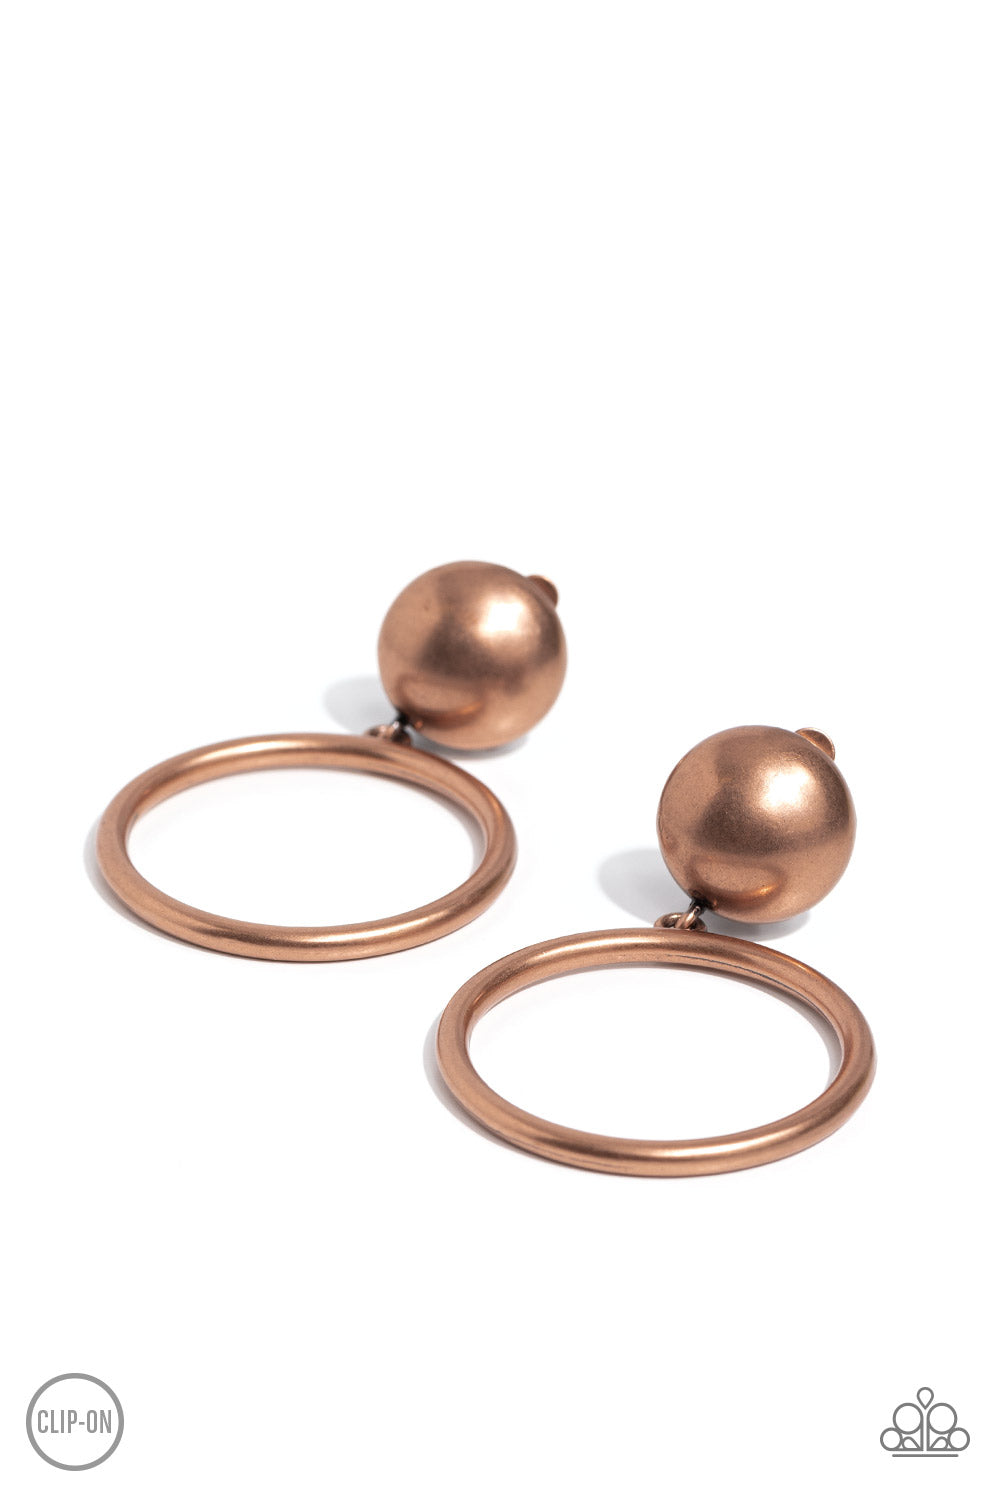 Classic Candescence - Copper (Clip-On Earring